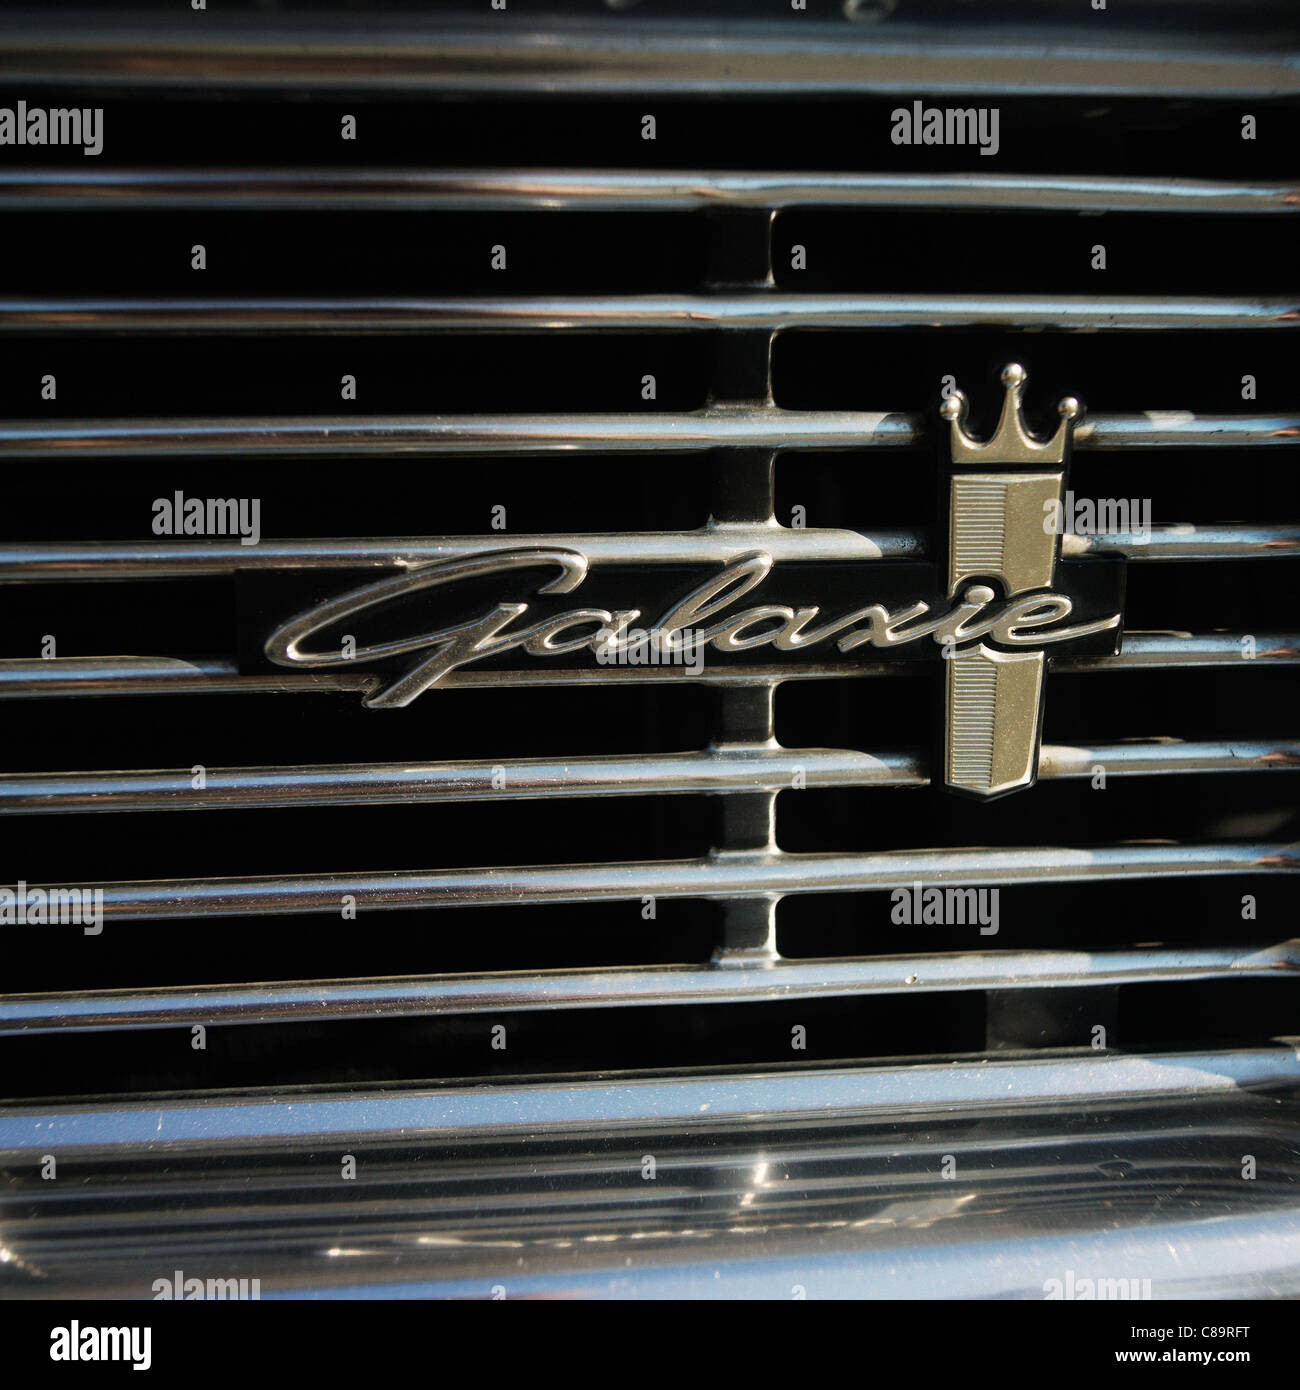 Ford Galaxie classic car grill close up Banque D'Images